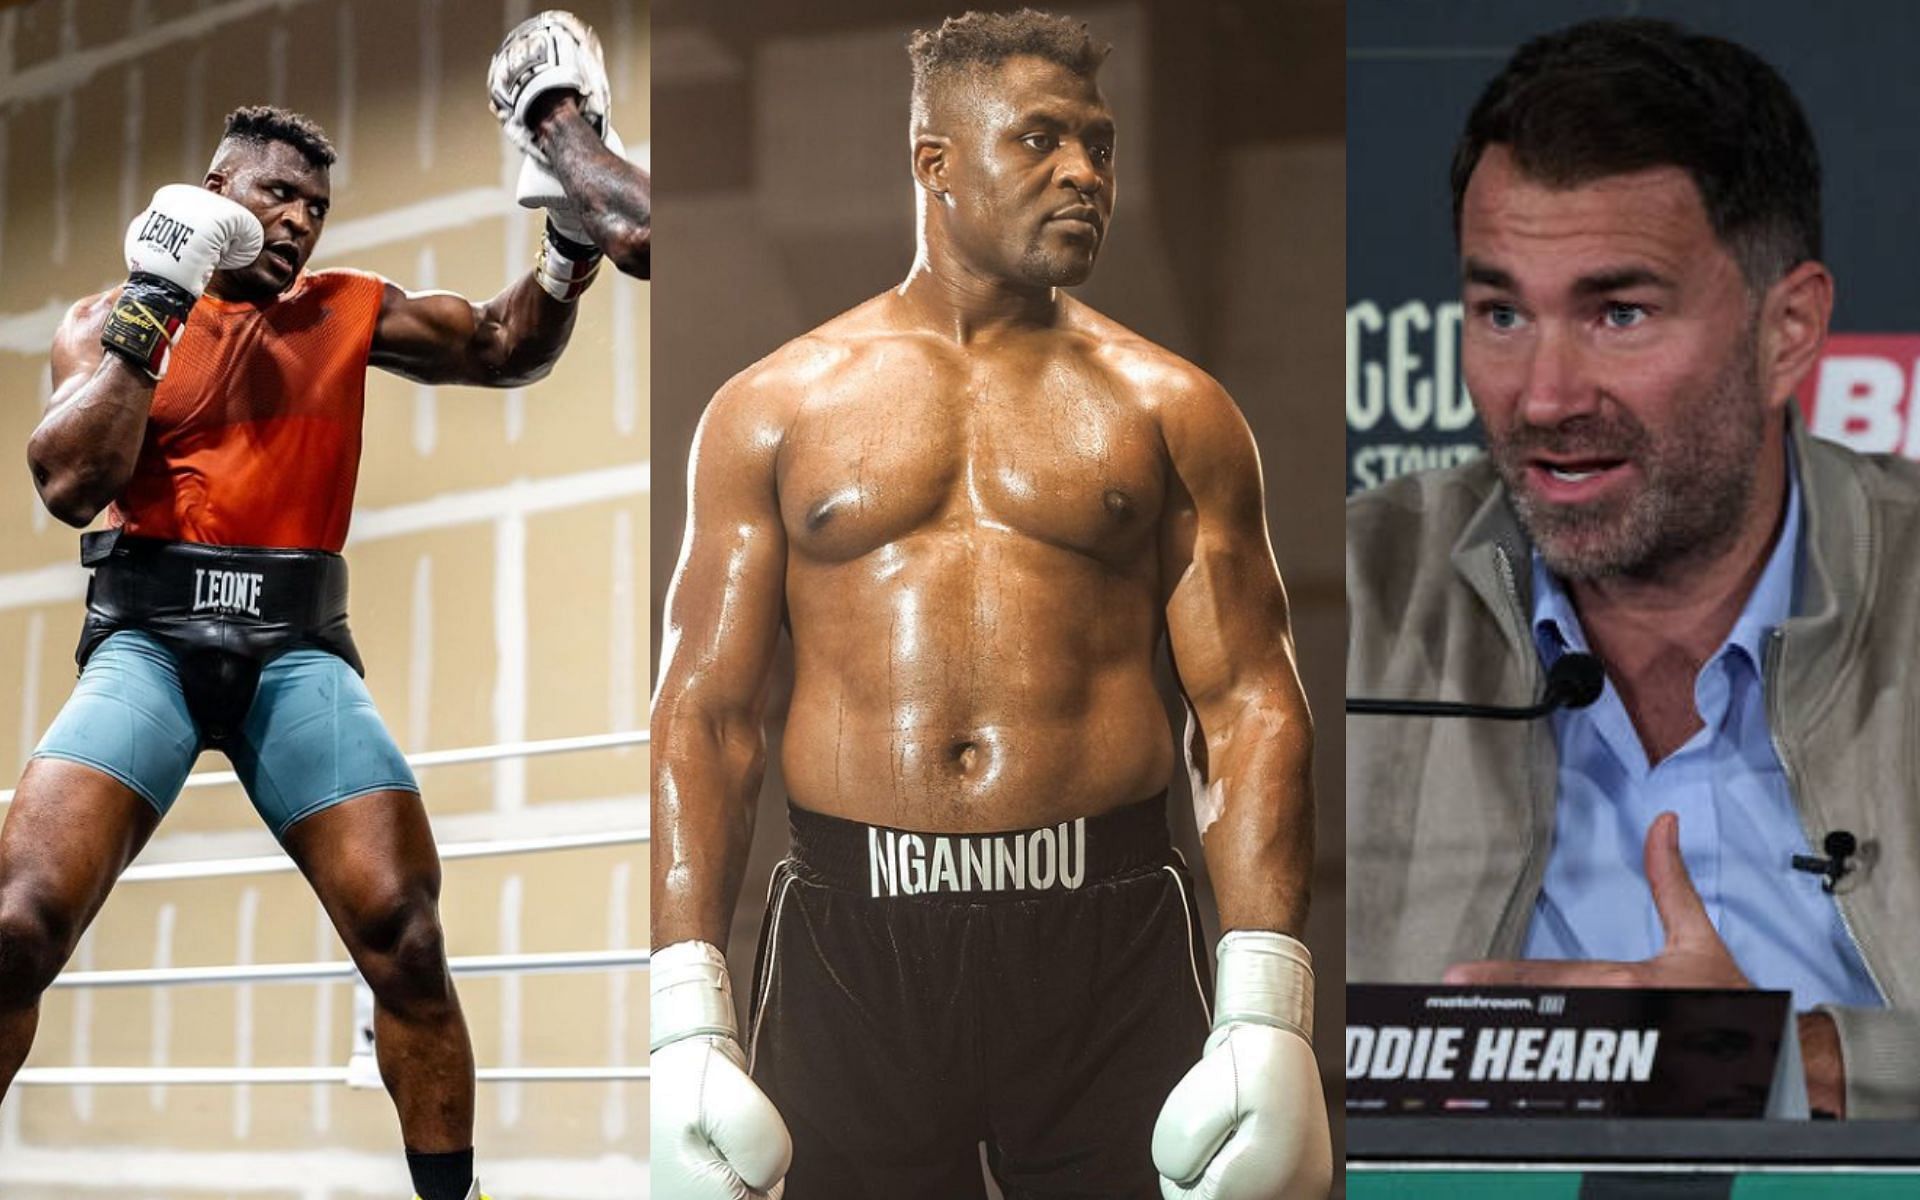 Francis Ngannou (left) and (middle) will never contend for a boxing world title, says Eddie Hearn (right) [Images Courtesy: @GettyImages and @francisngannou on Instagram]